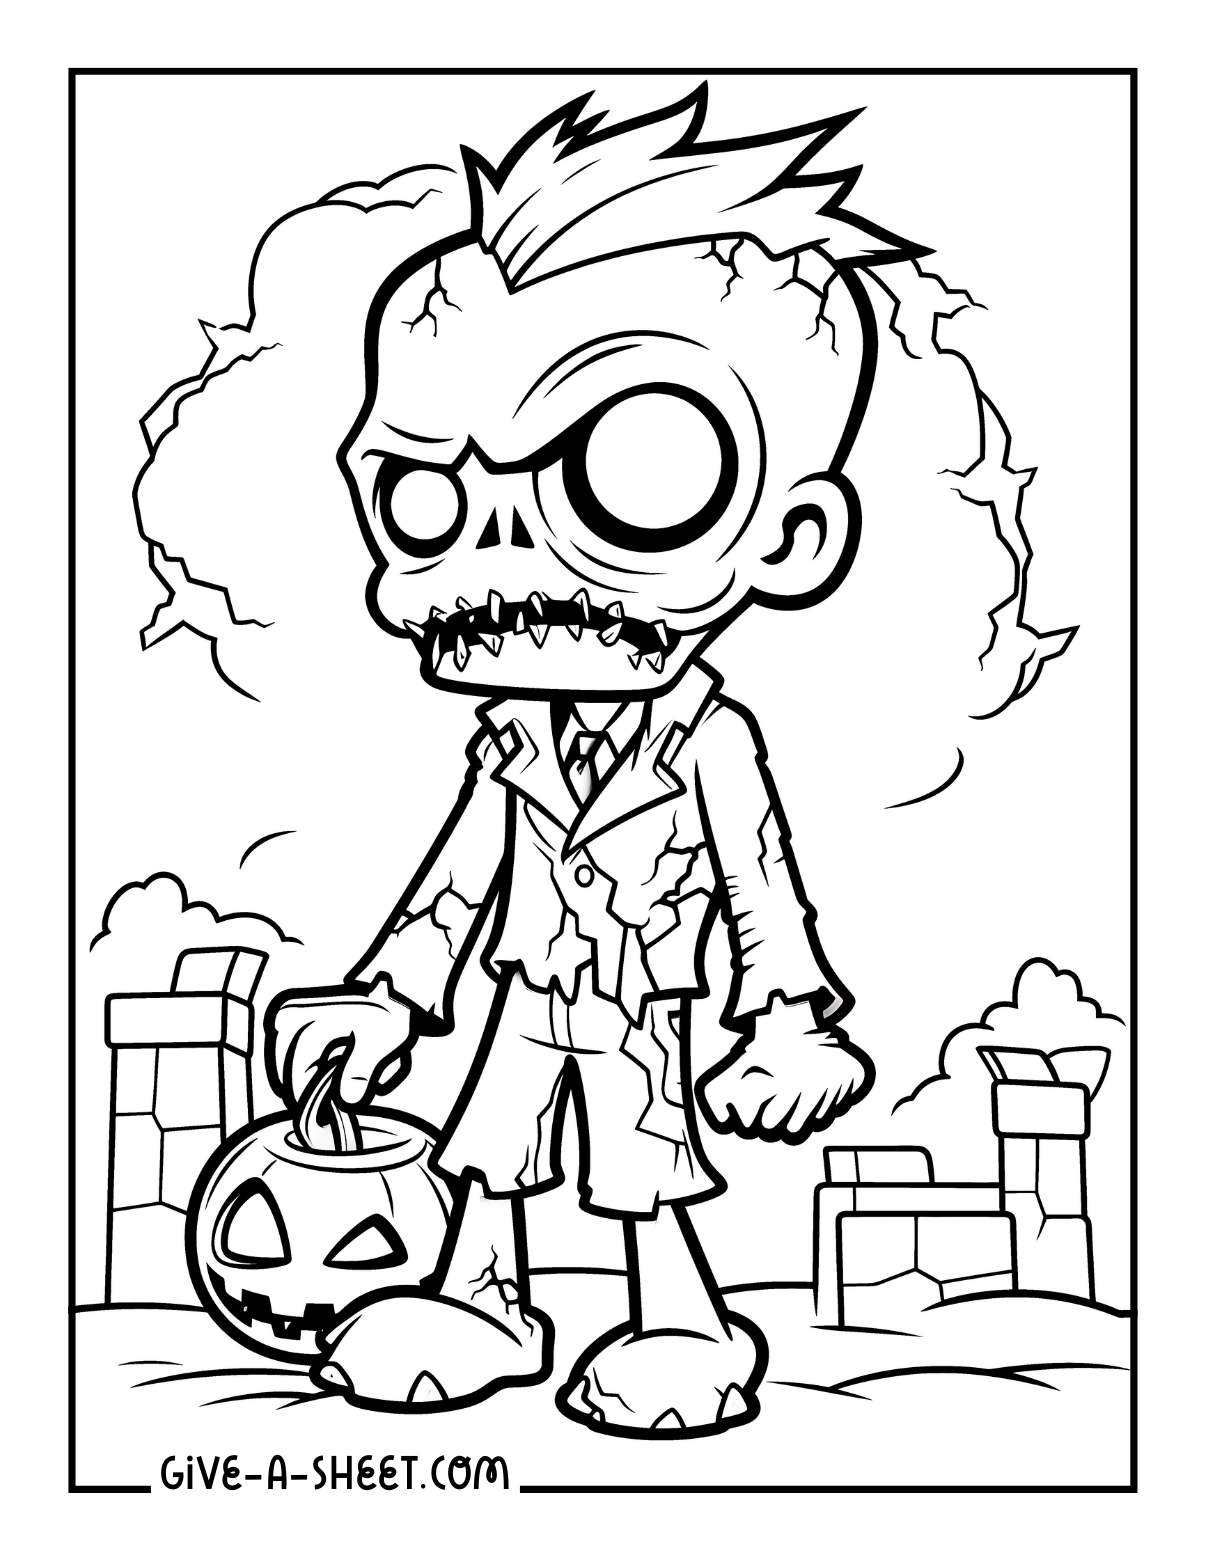 Halloween zombie coloring page.